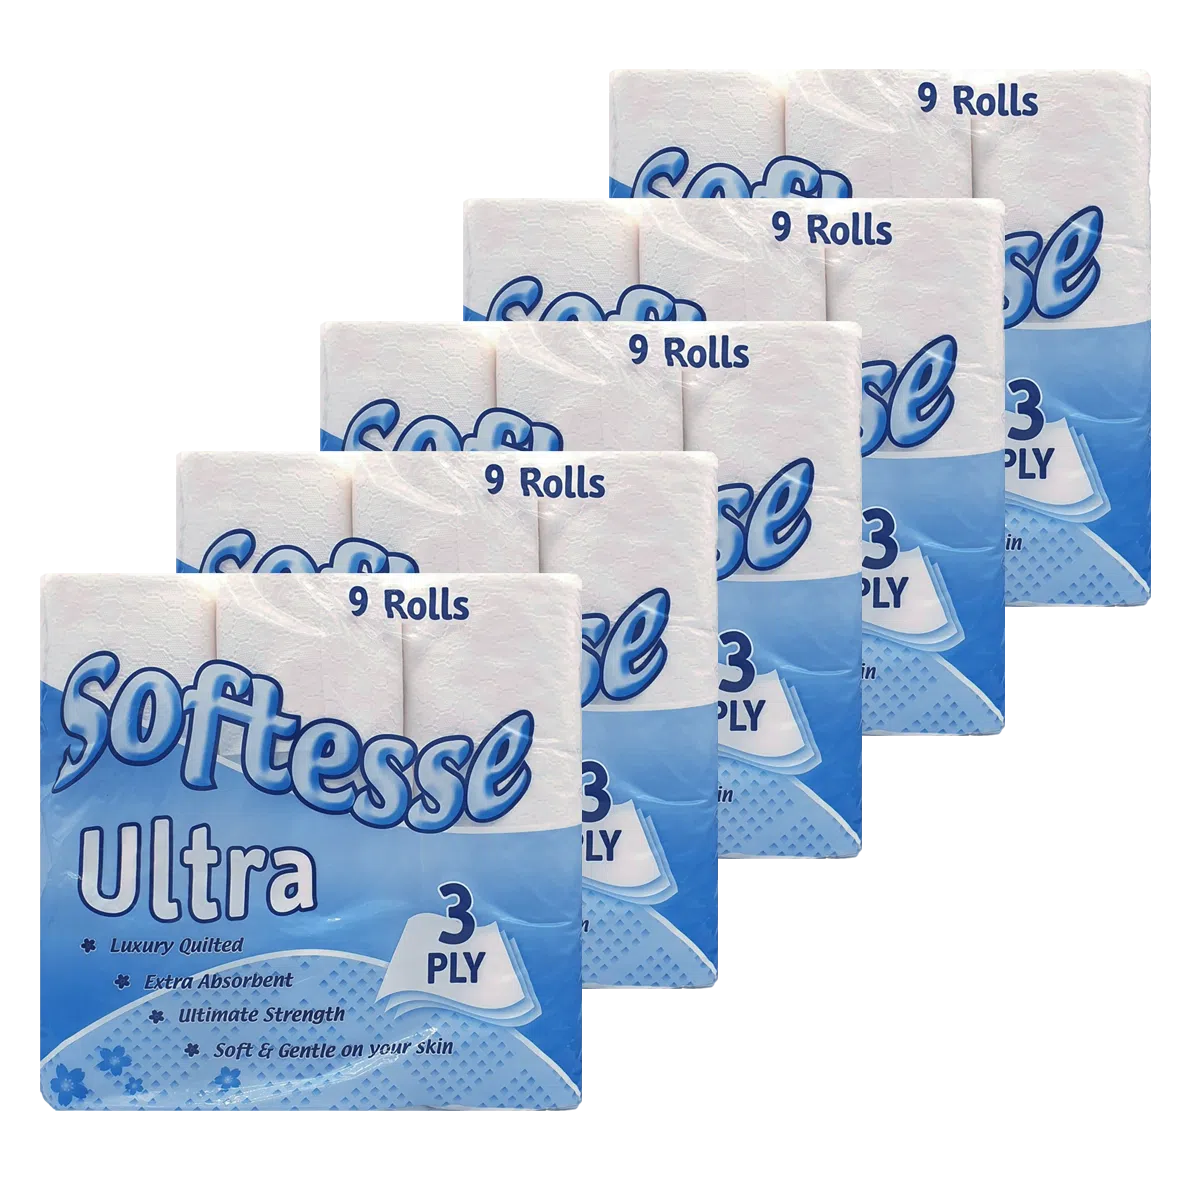 Softesse Ultra Luxury Quilted Toilet Tissue 3 Ply – 45 Rolls (9x5 Pack)